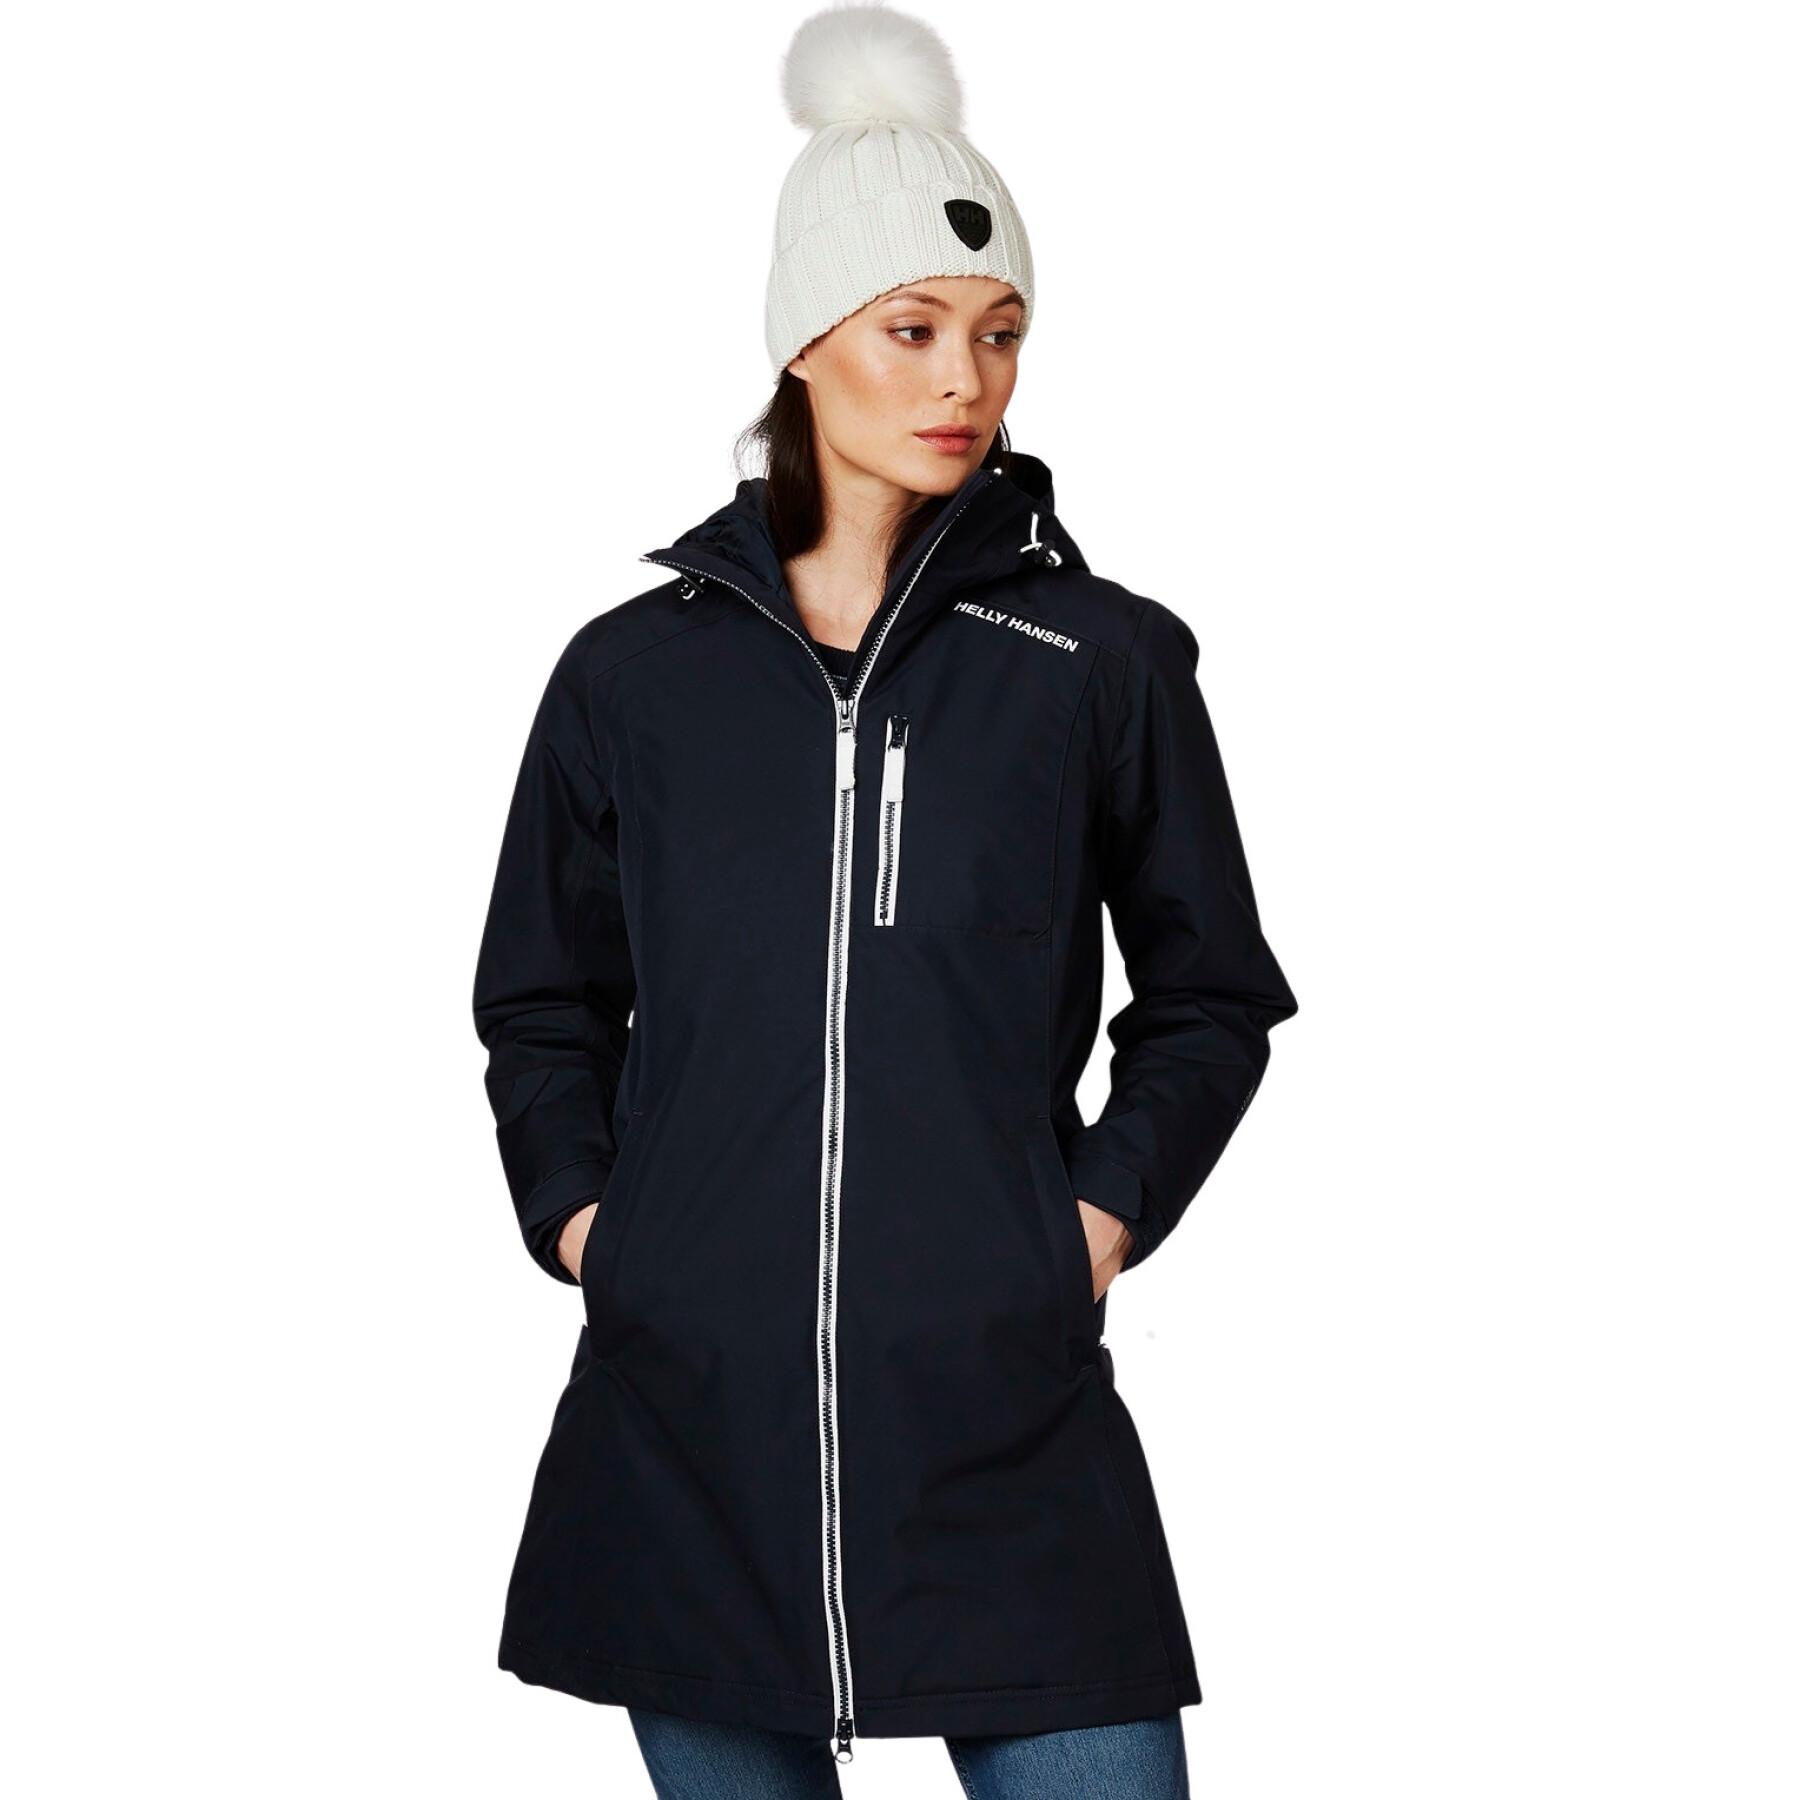 Chaqueta impermeable mujer Helly Hansen long belfast winter